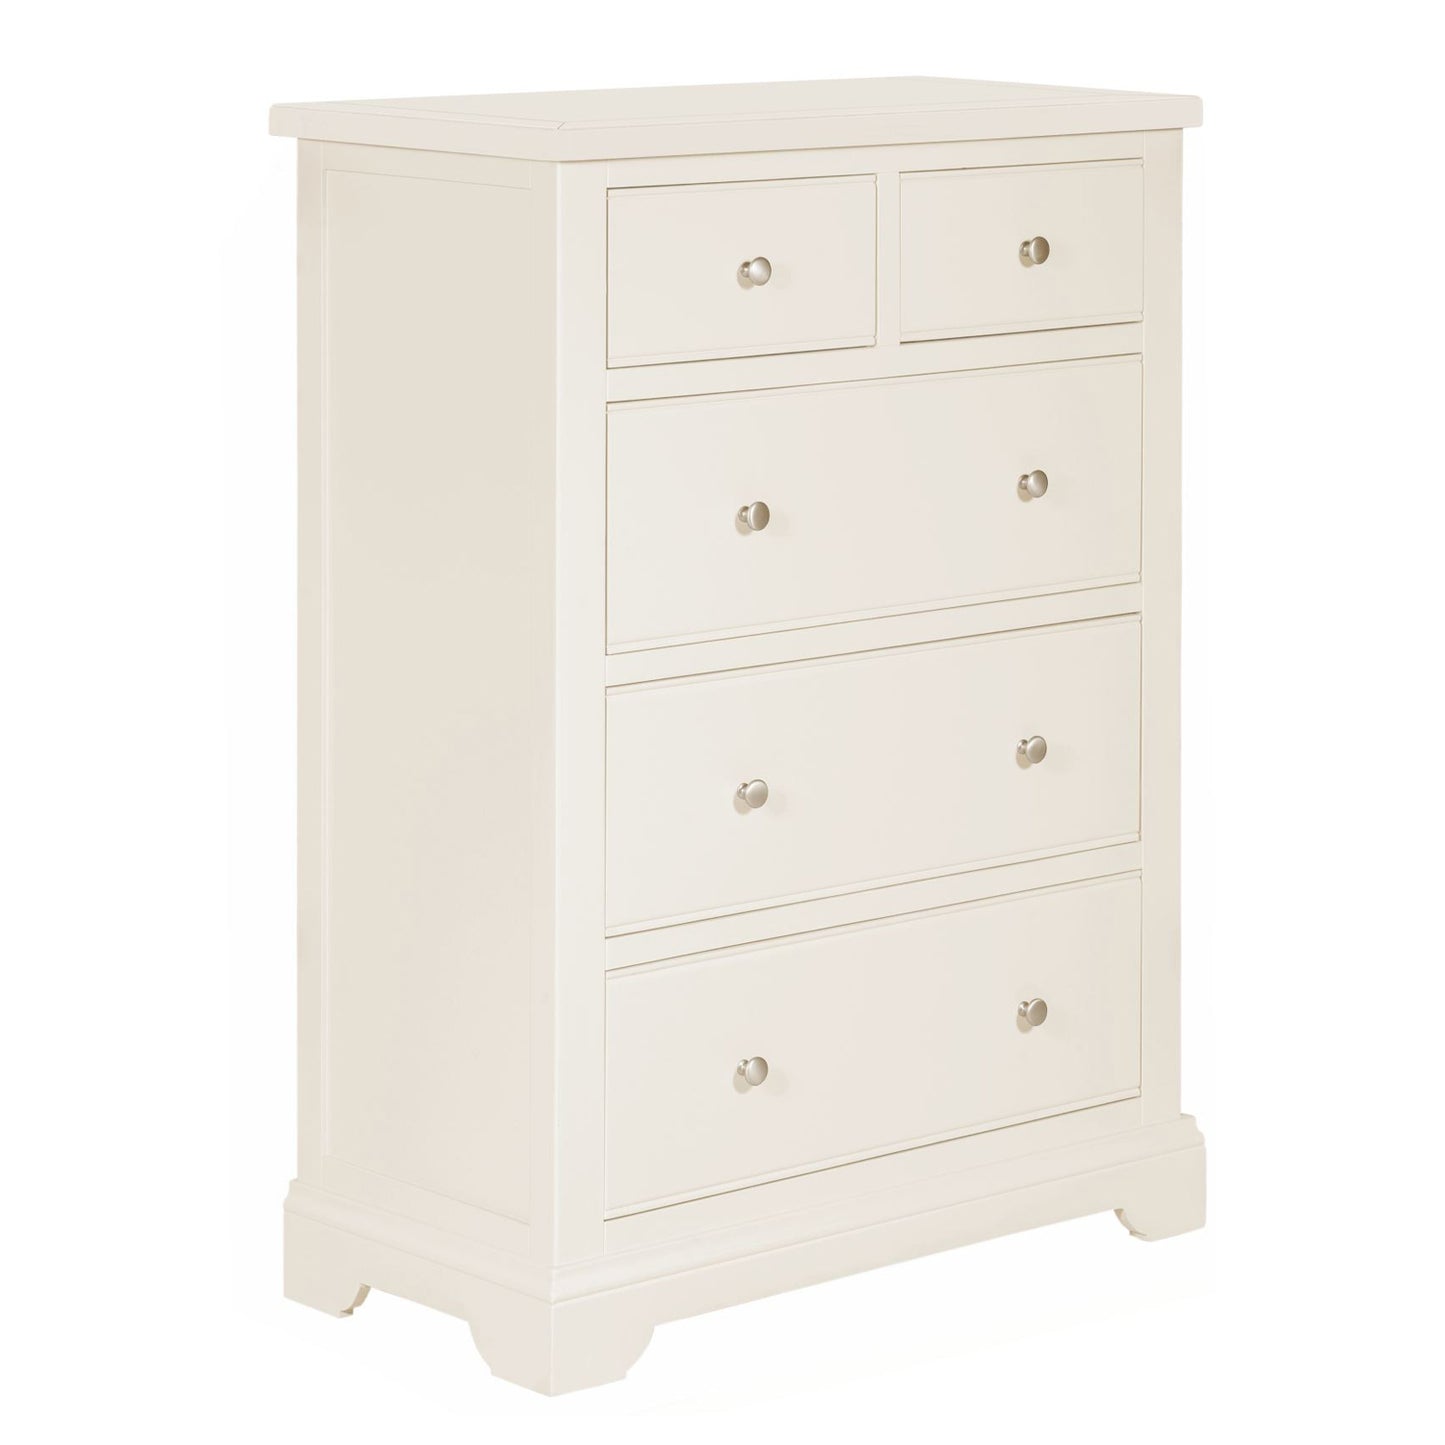 Hardingham White Painted Chest of Drawers - 2 Over 3